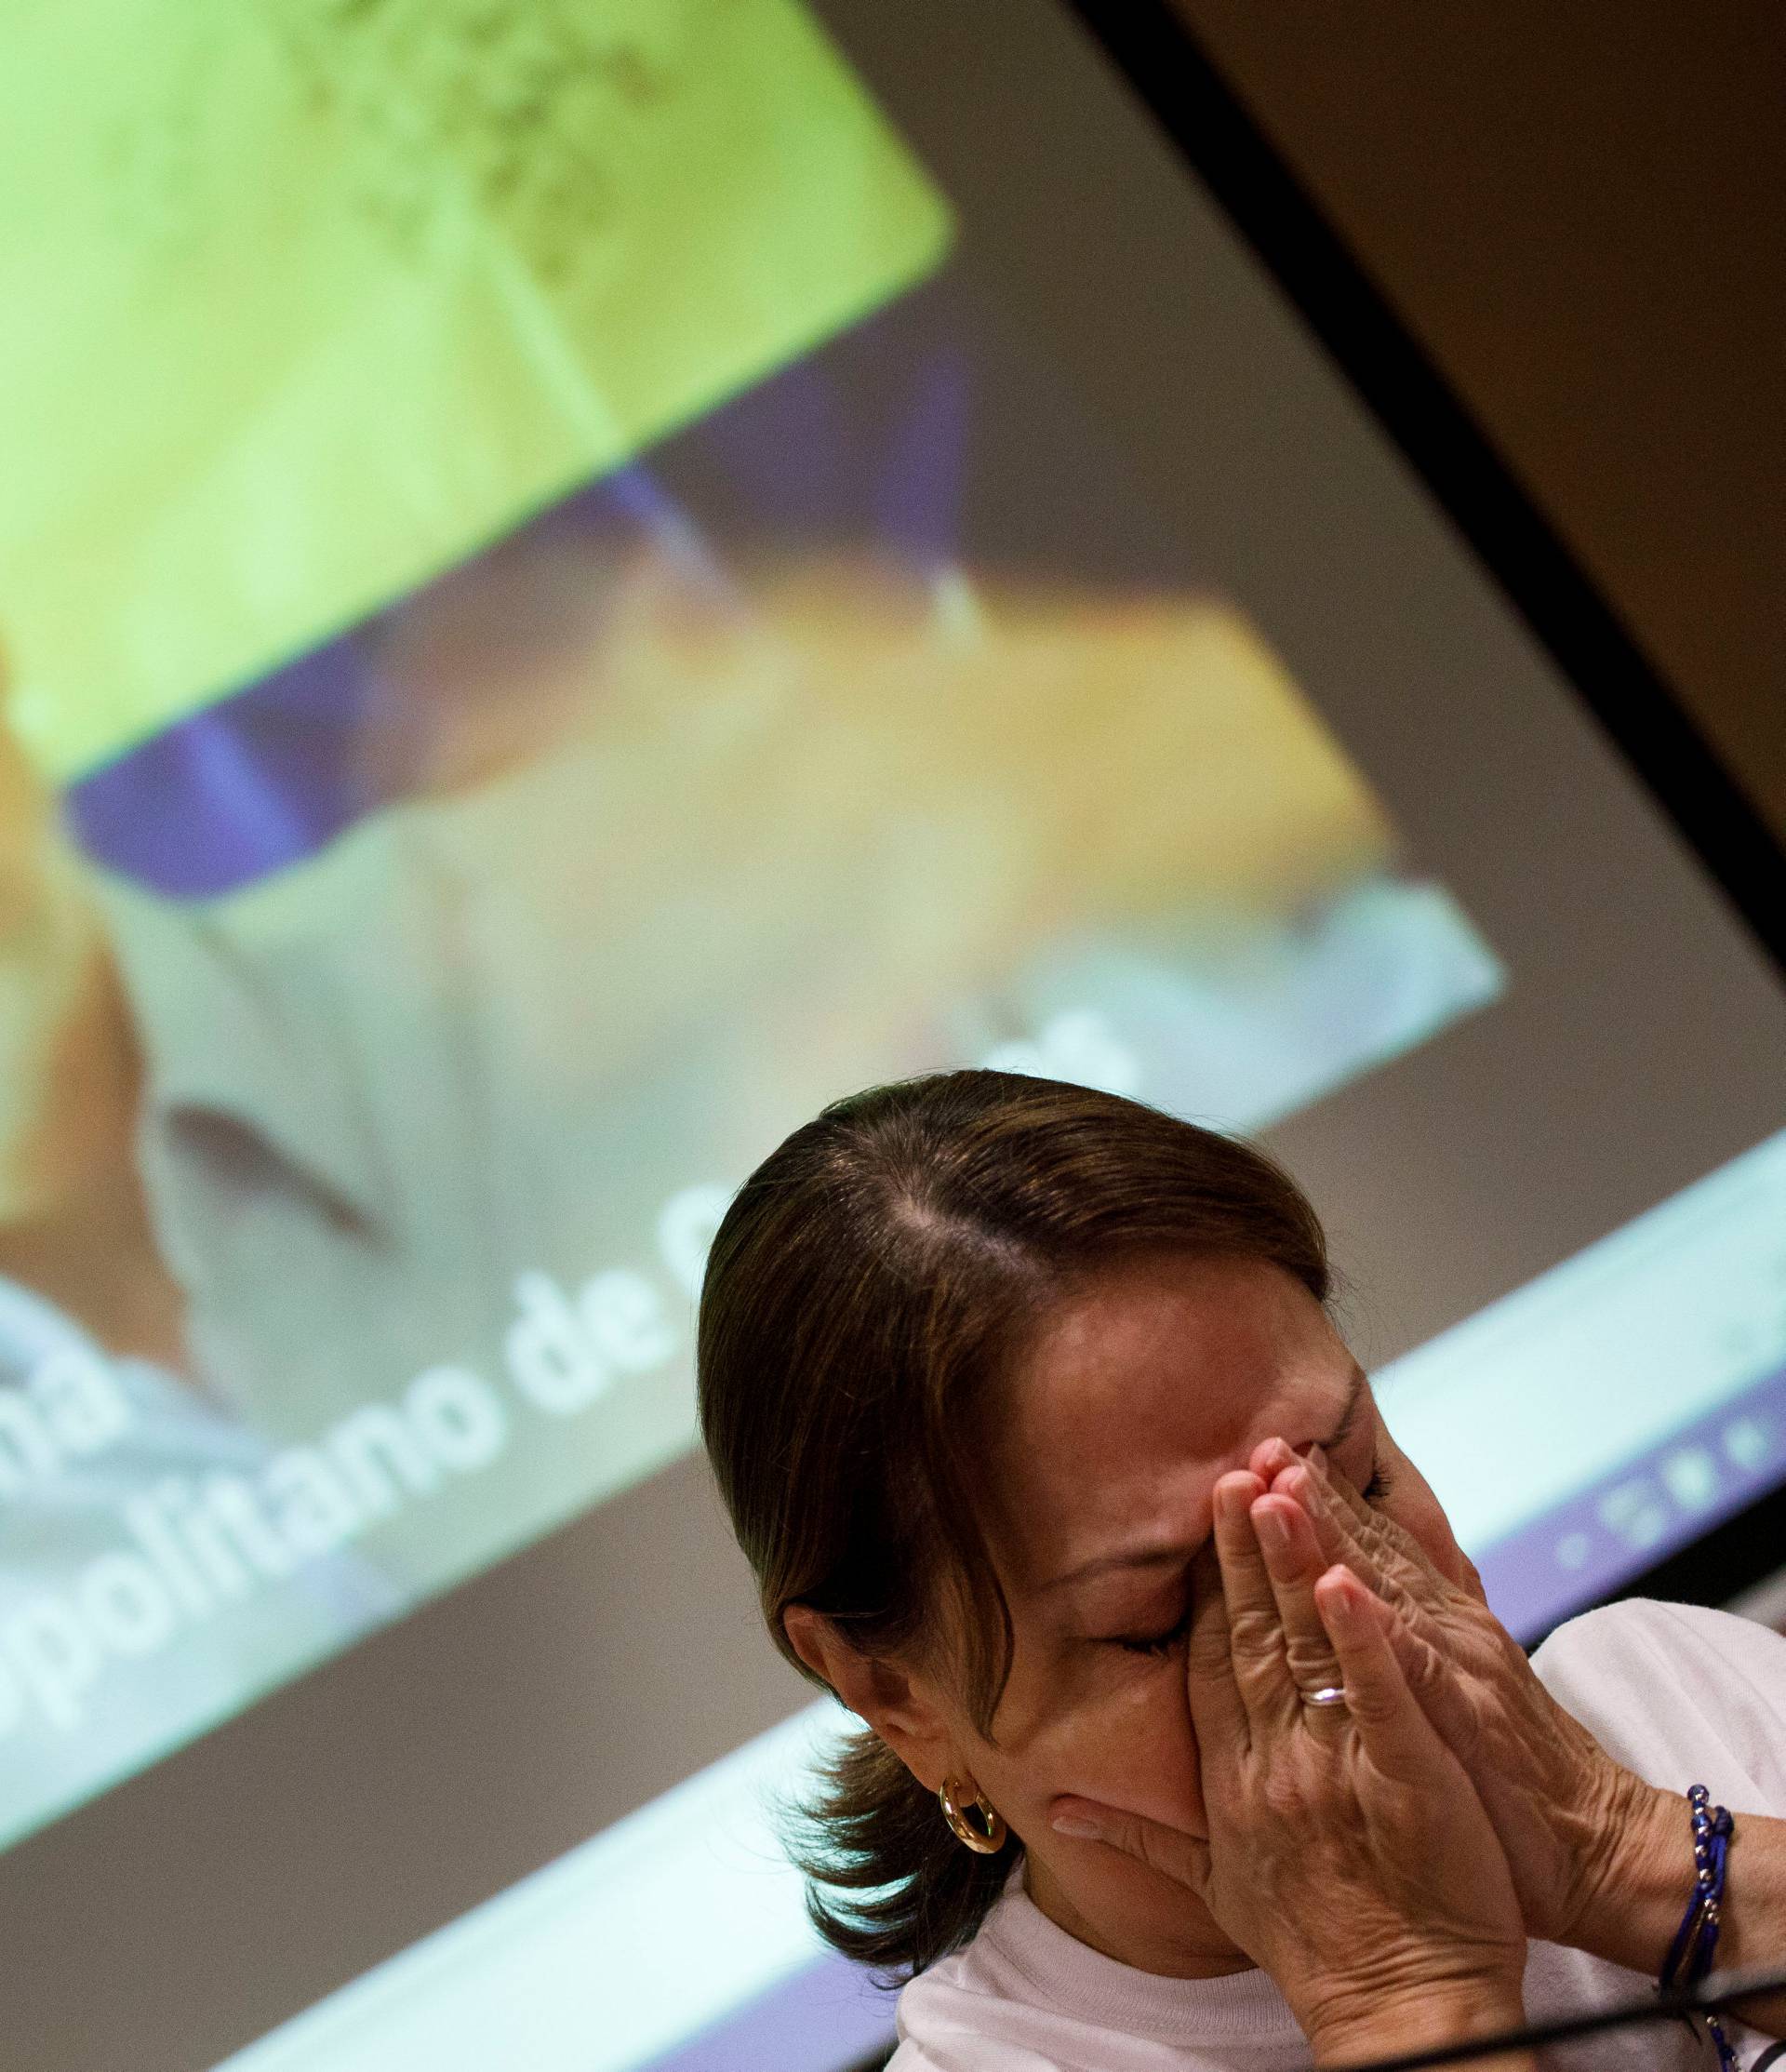 Mitzy Capriles de Ledezma, wife of former Caracas mayor Antonio Ledezma, reacts during a video showing her husband during a news conference in Madrid